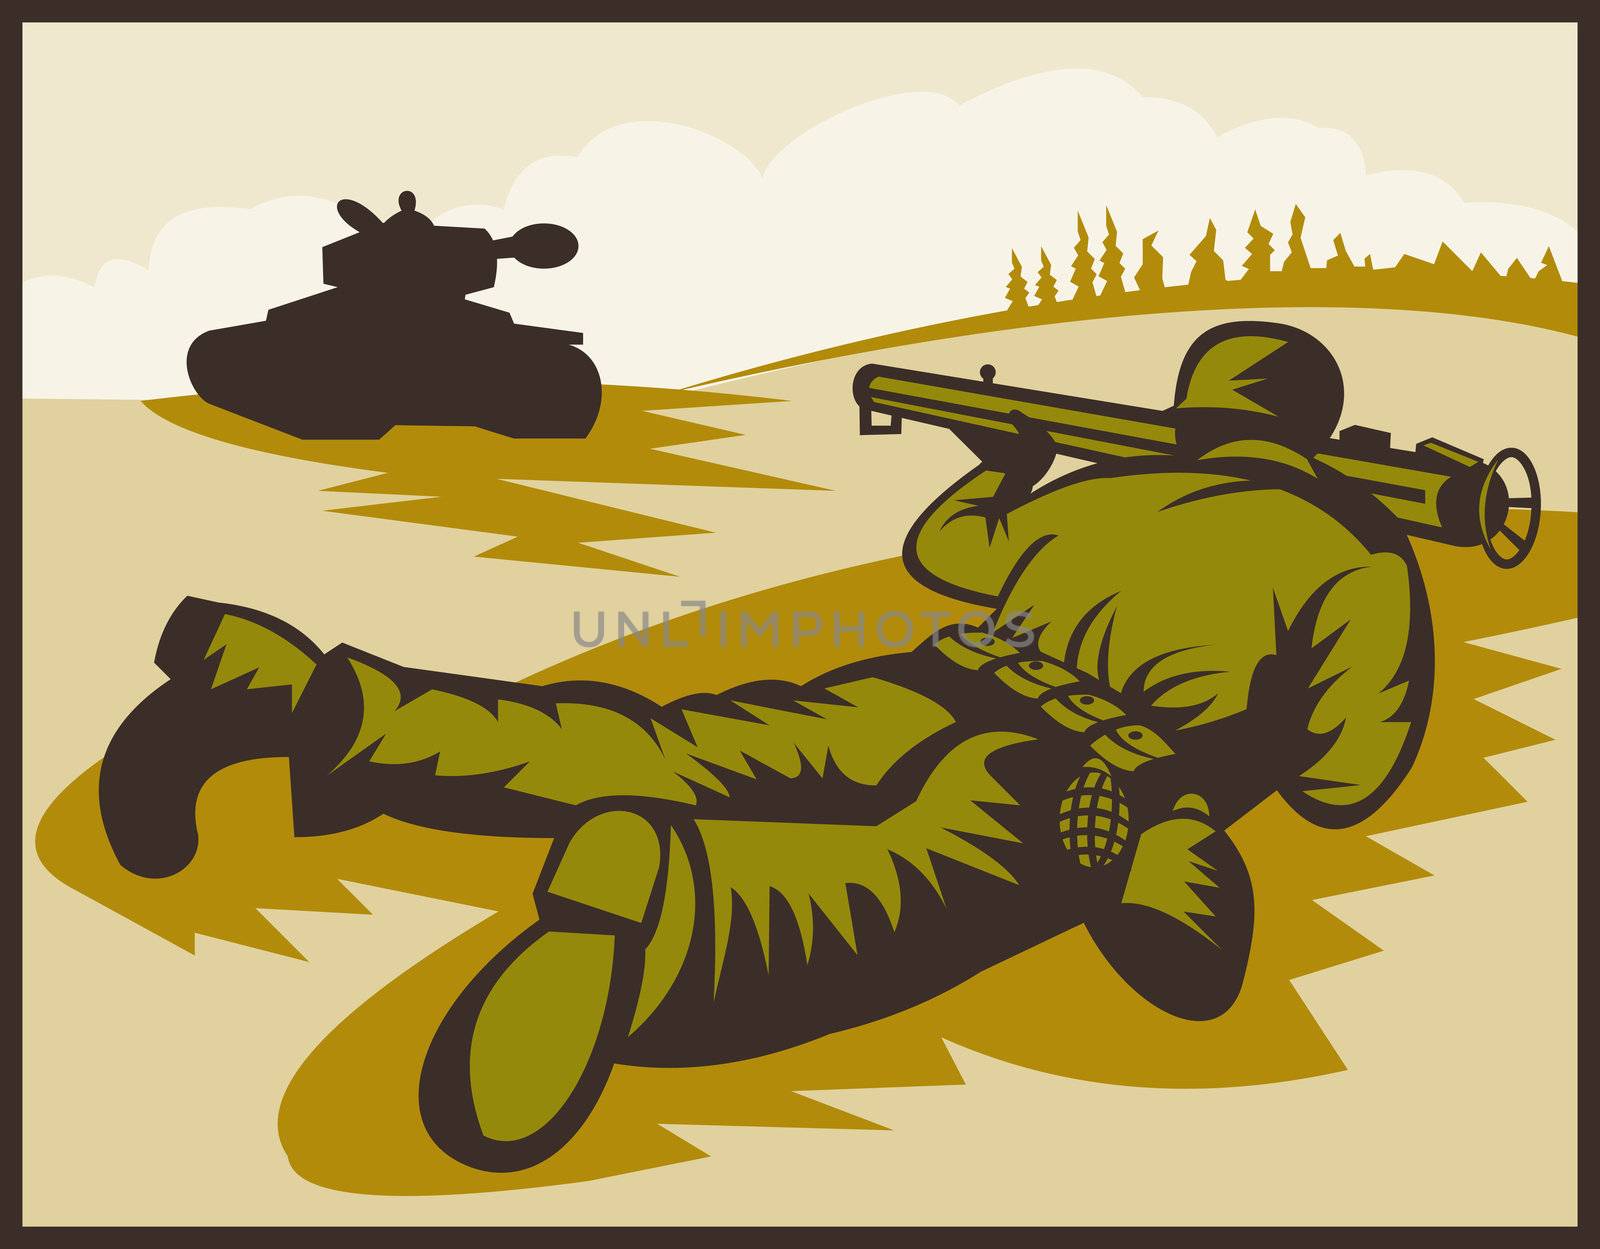  illustration of a World two soldier aiming bazooka at battle tank.